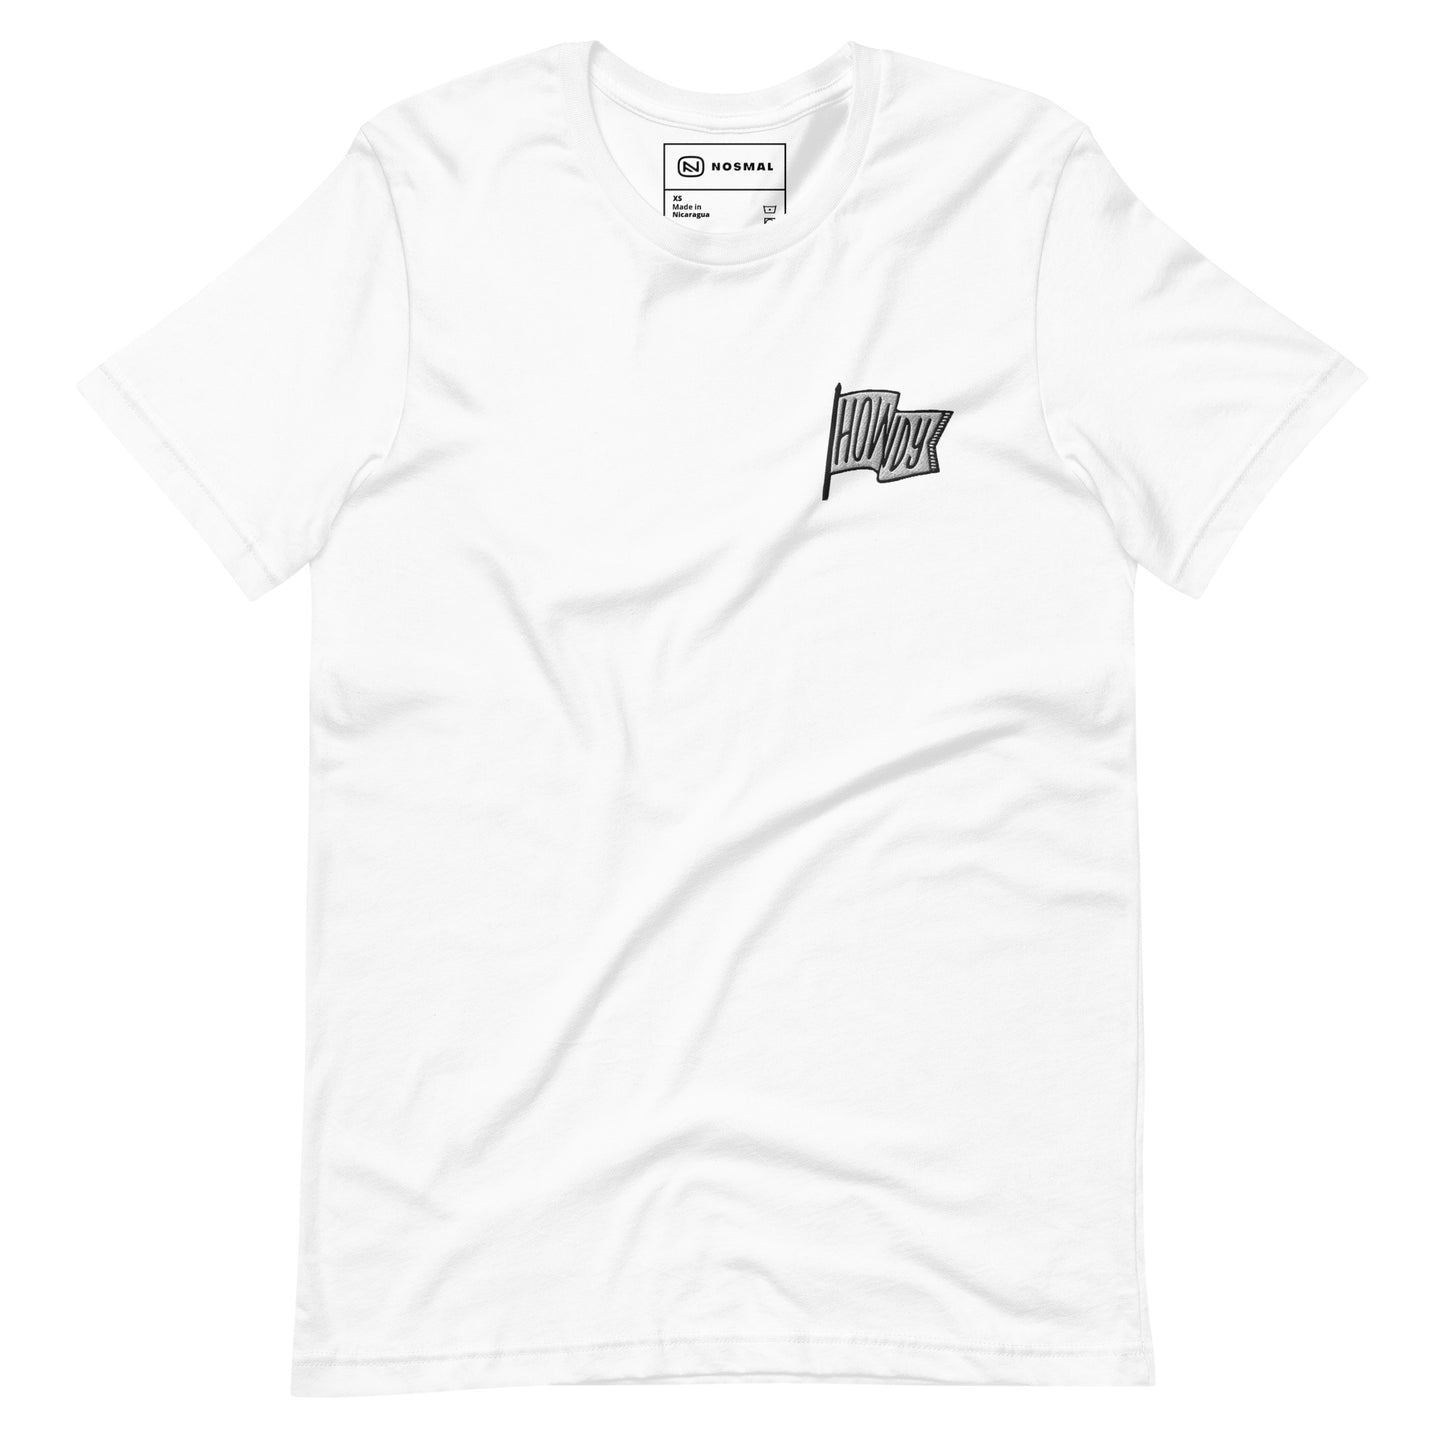 Straight on view of howdy embroidered design on white unisex t-shirt.